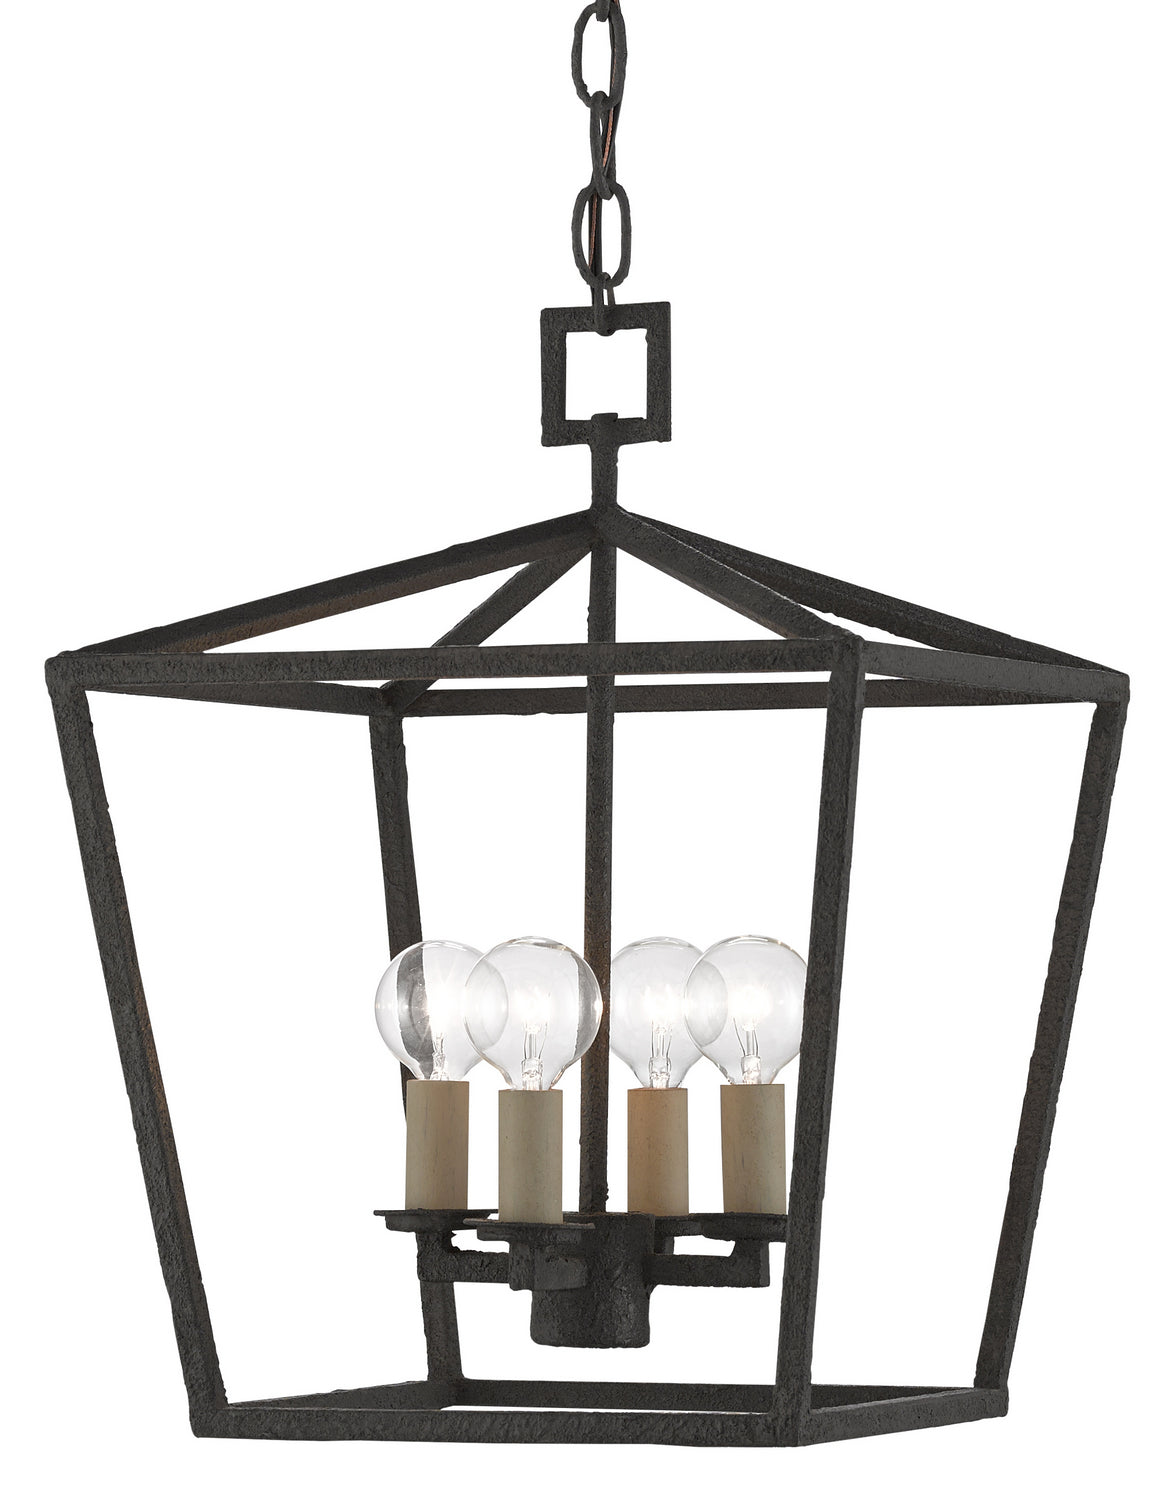 Four Light Lantern from the Denison collection in Molé Black finish